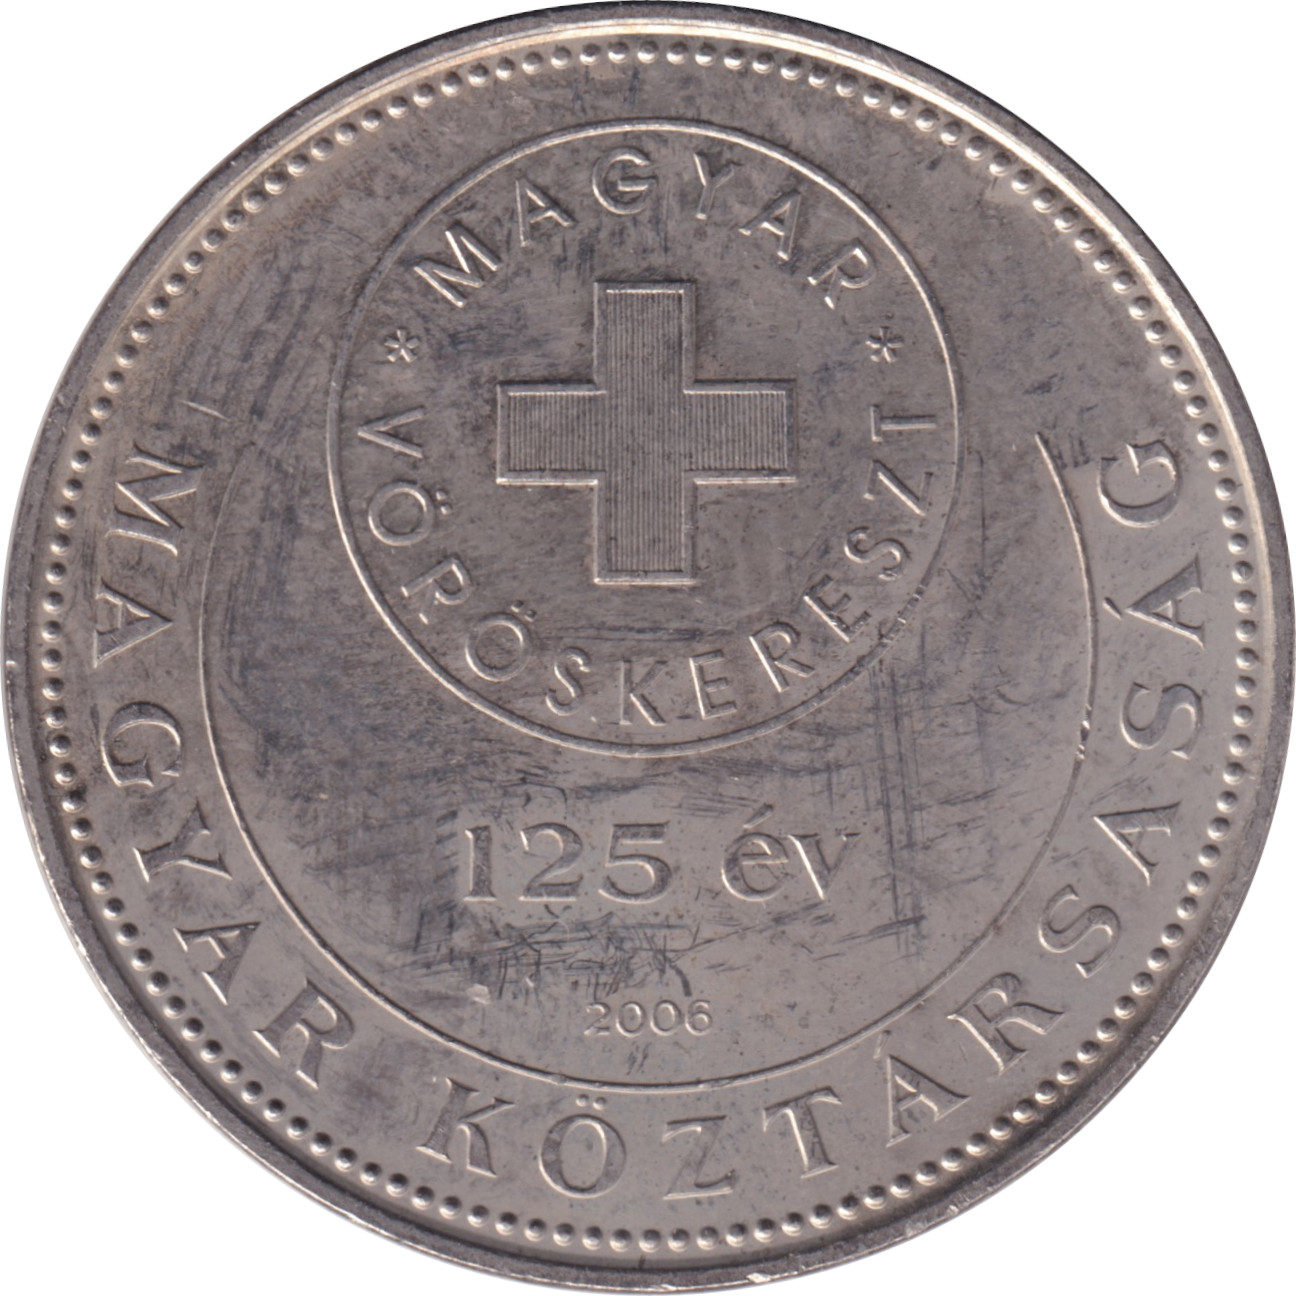 50 forint - Croix Rouge - 125 years